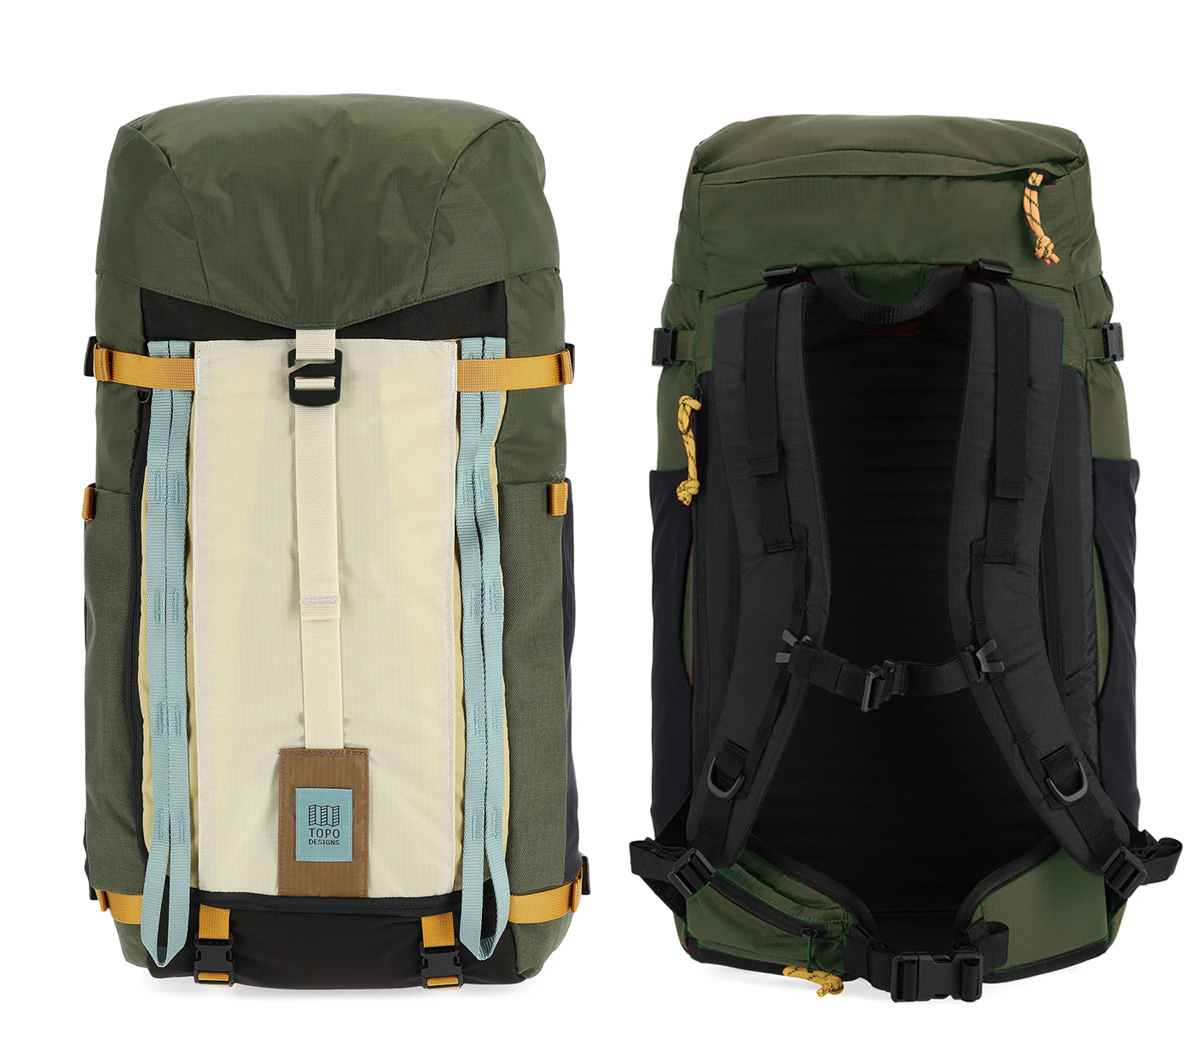 Topo Designs Mountain Pack 28L Bone White/Olive, front and back